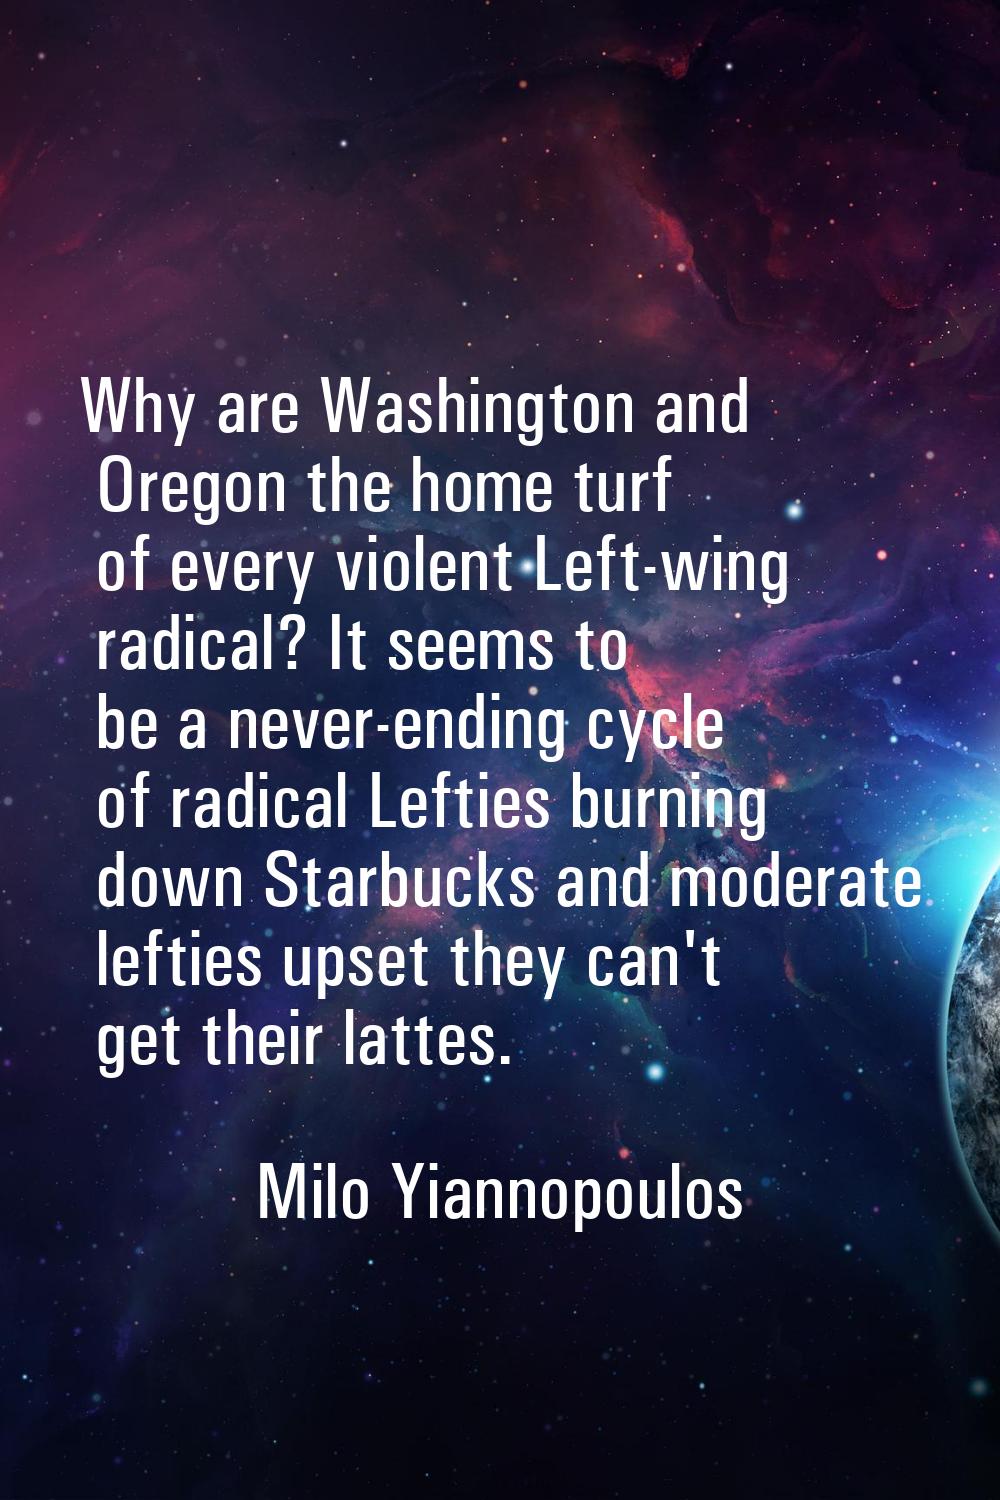 Why are Washington and Oregon the home turf of every violent Left-wing radical? It seems to be a ne